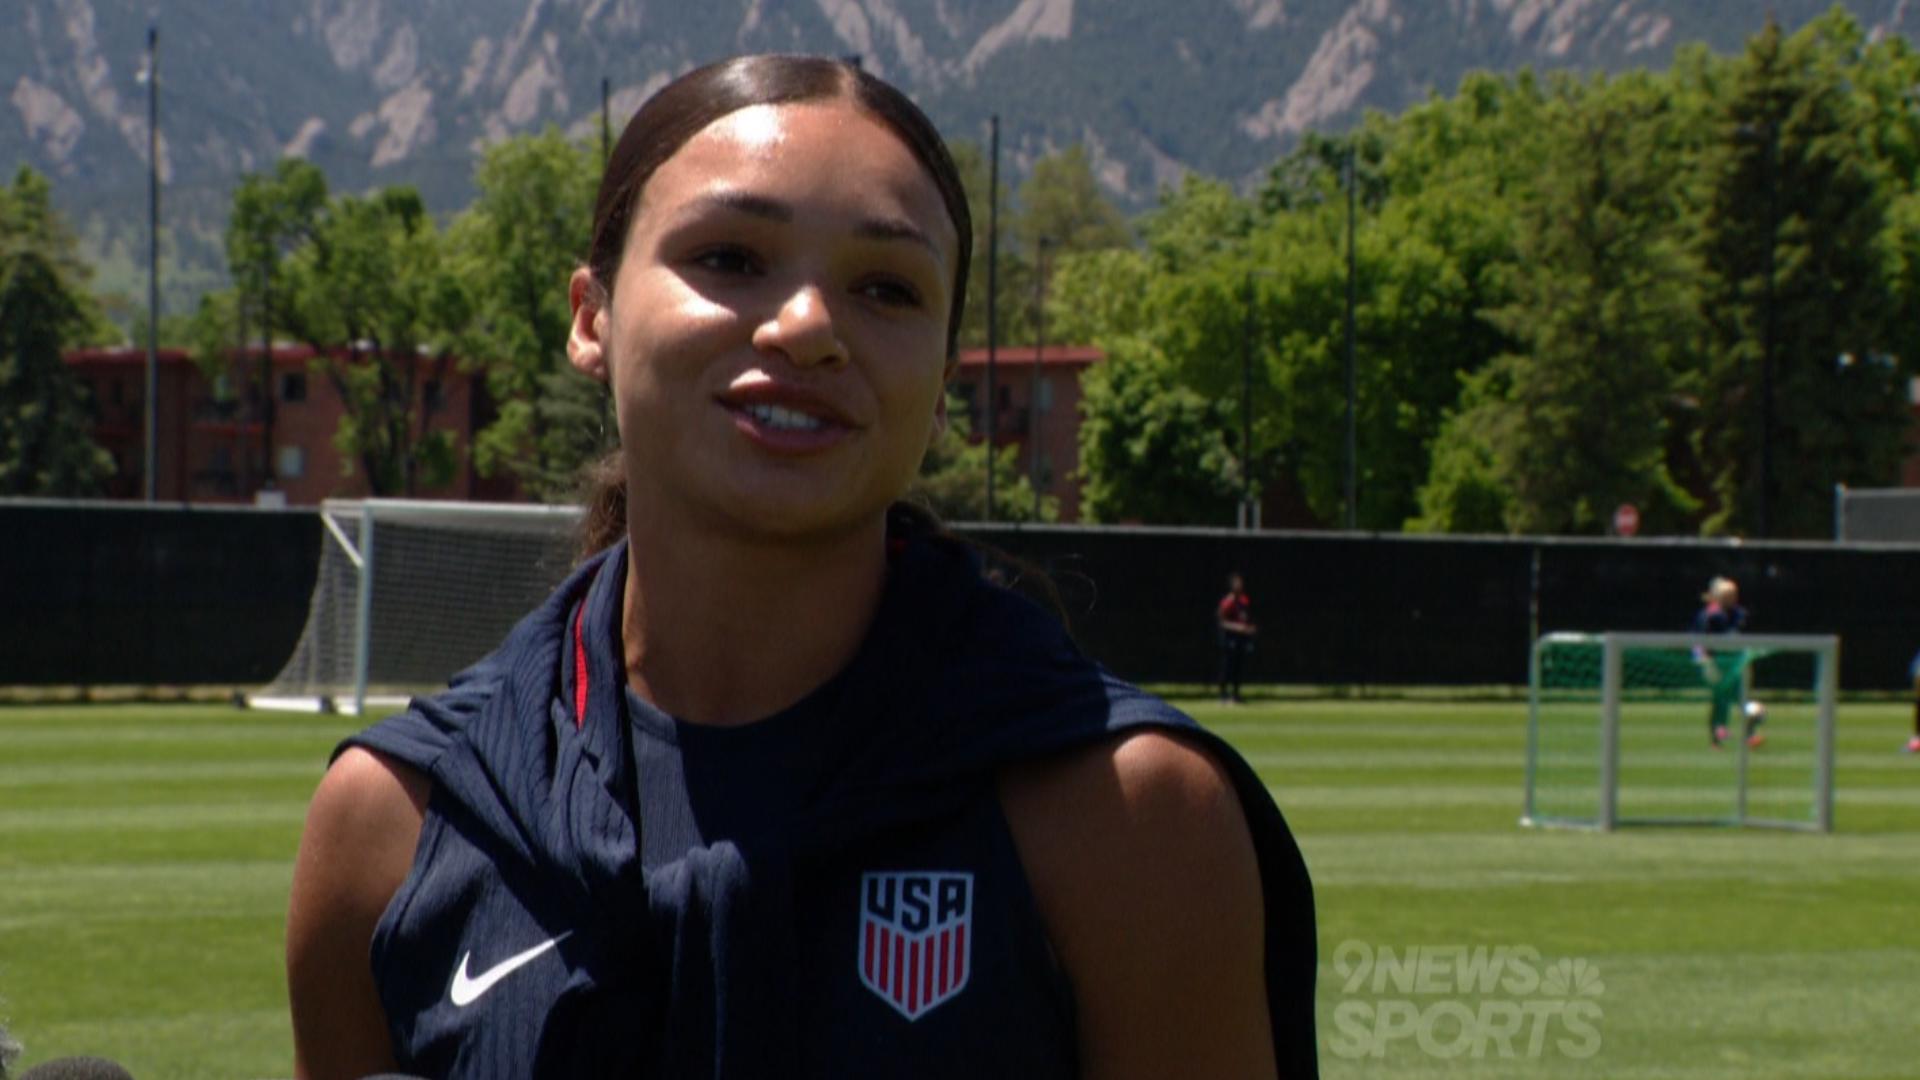 The USWNT will play a friendly match against South Korea in Commerce City on Saturday.